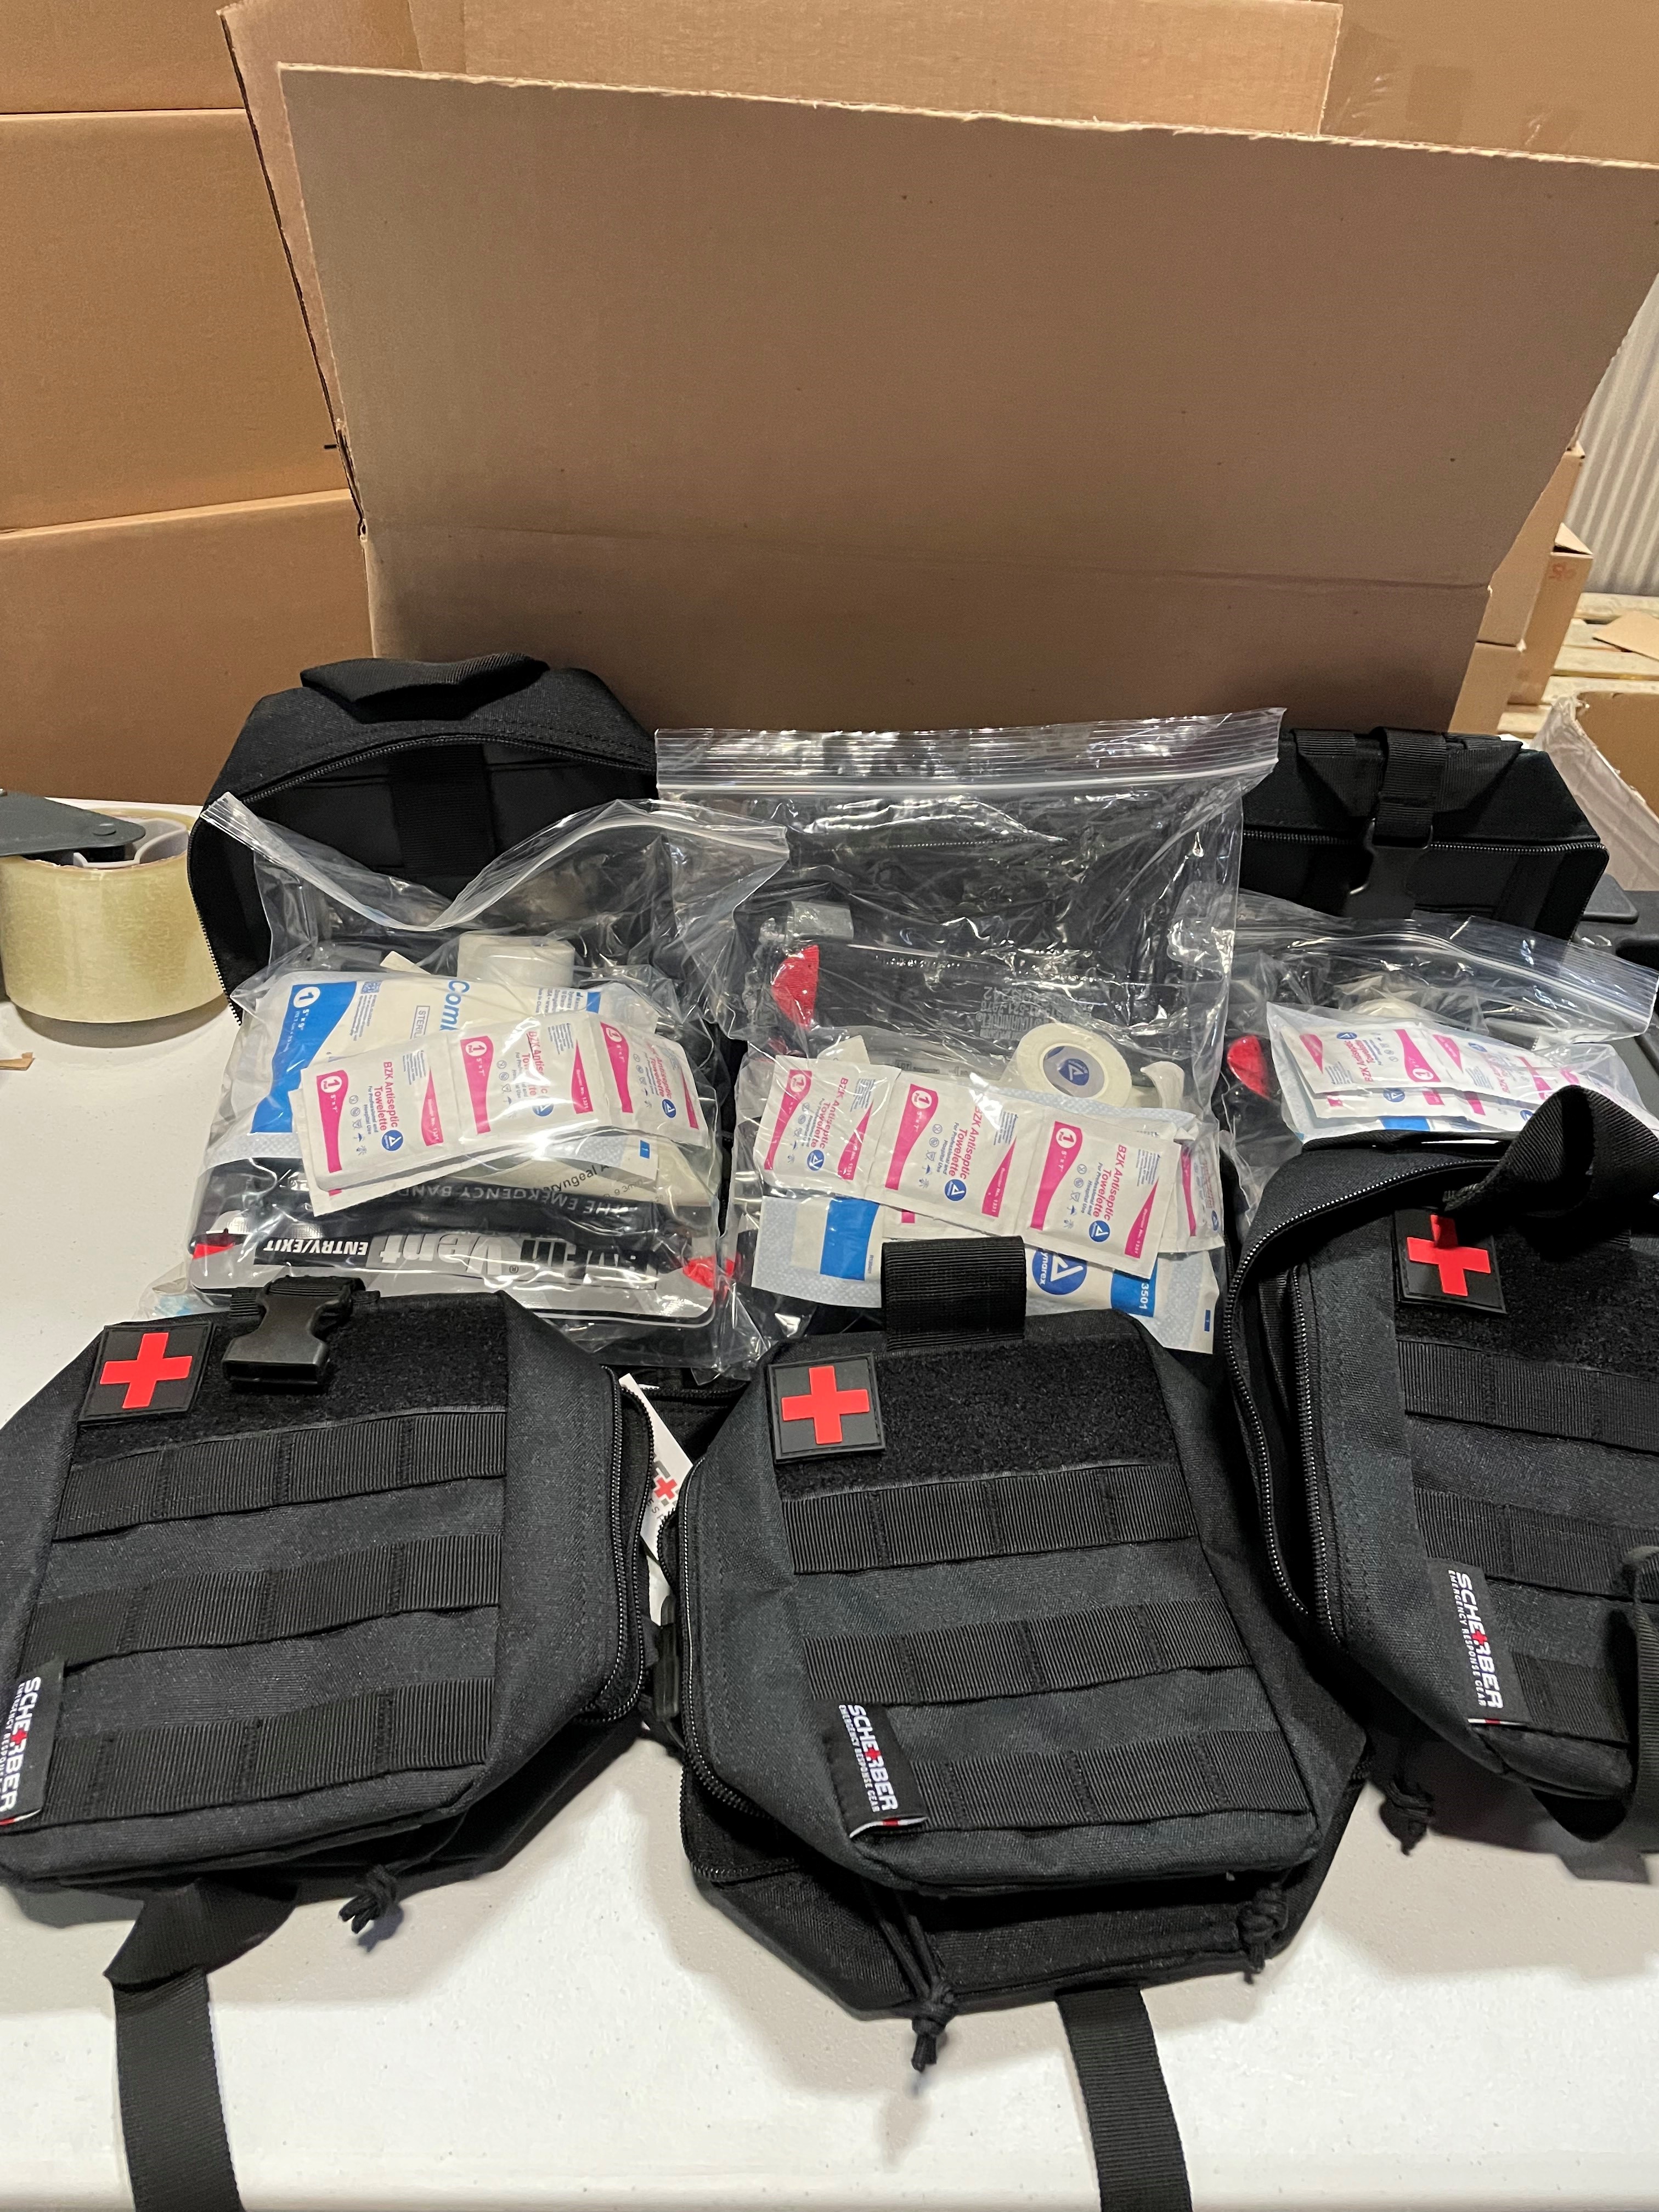 Individual First Aid Kits being packed for shipment to Ukraine